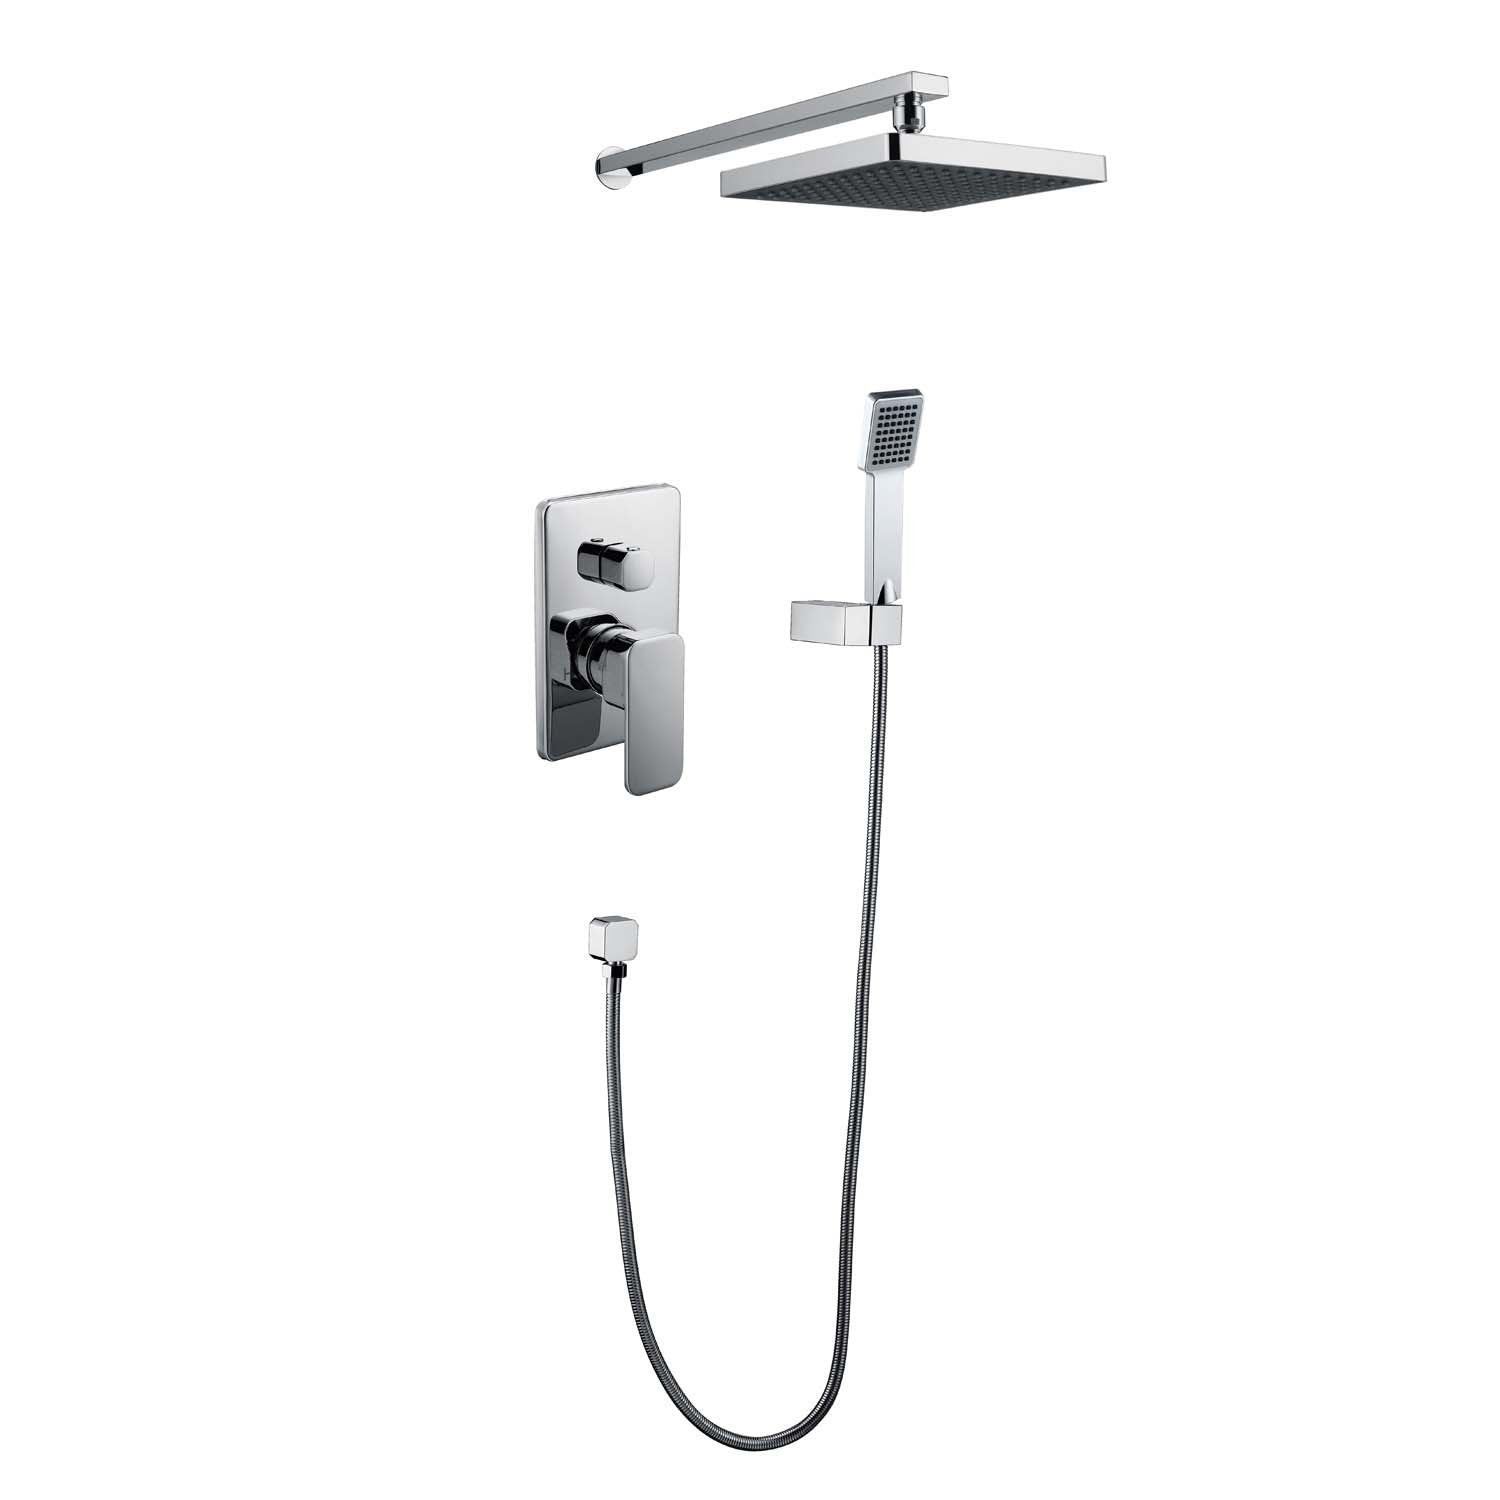 DAX Bathroom Rain Mixer Shower, Square Rainfall Shower Head System with Shower Trim and Hand Shower, Wall Mount, Brushed Nickel Finish (DAX-6813B-BN)